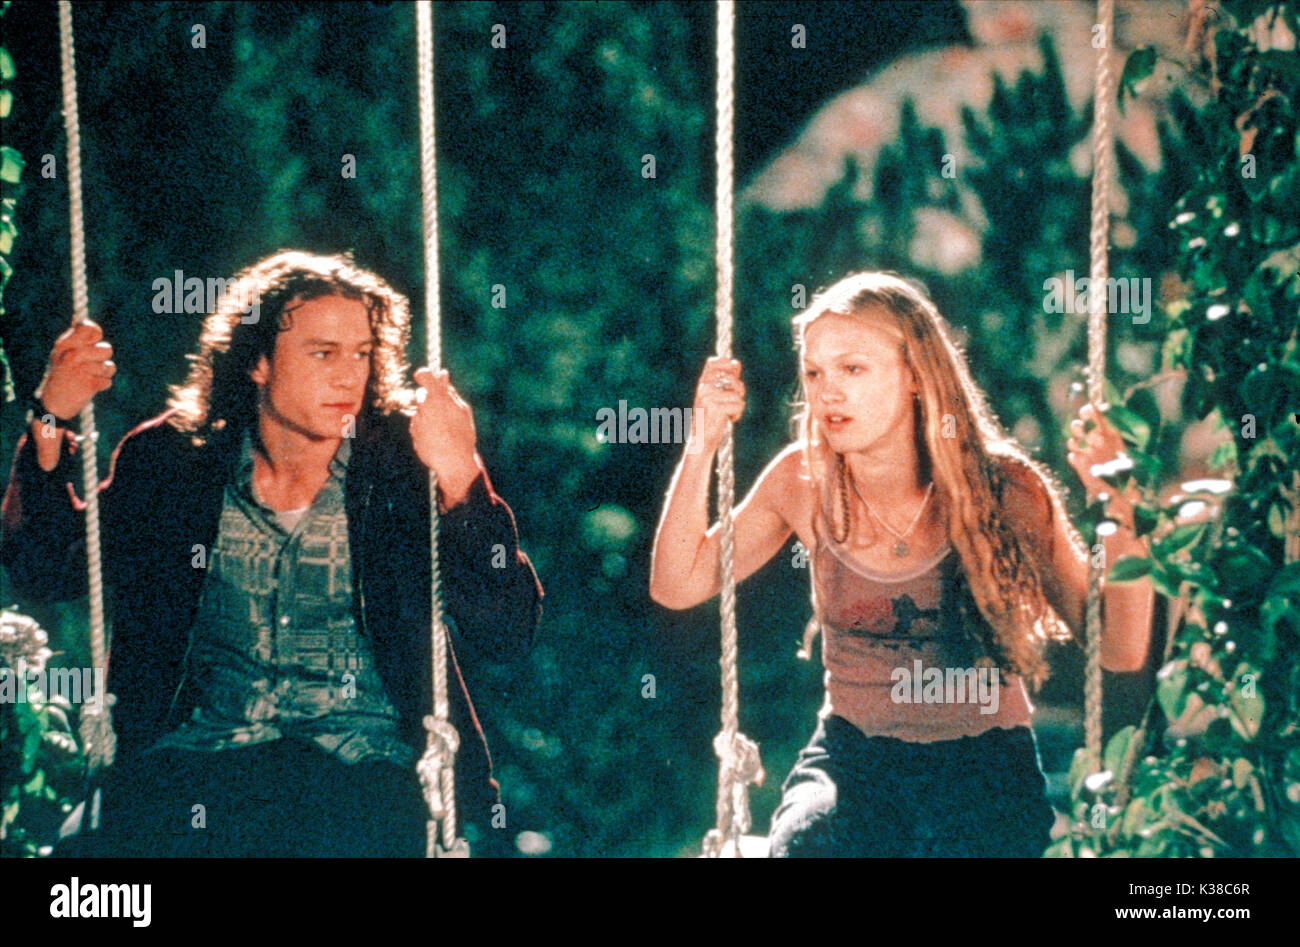 10 things i hate about you movie hi-res stock photography and images - Alamy